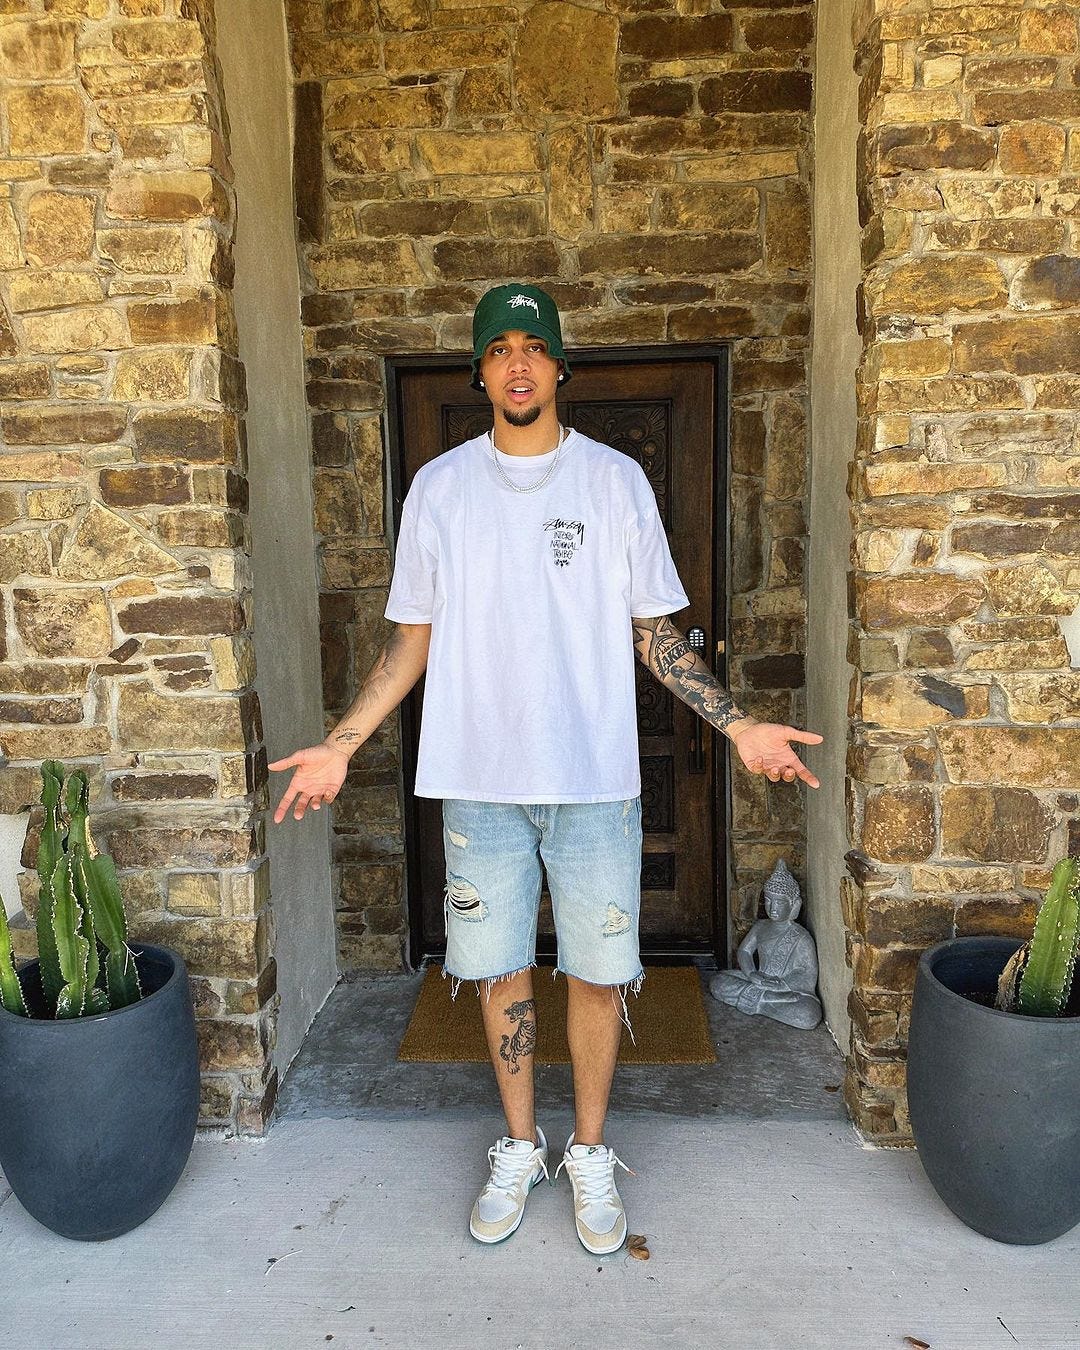 man standing in a doorway wearing a green baseball cap, white t-shirt, light ripped jean shorts, and Nike sneakers